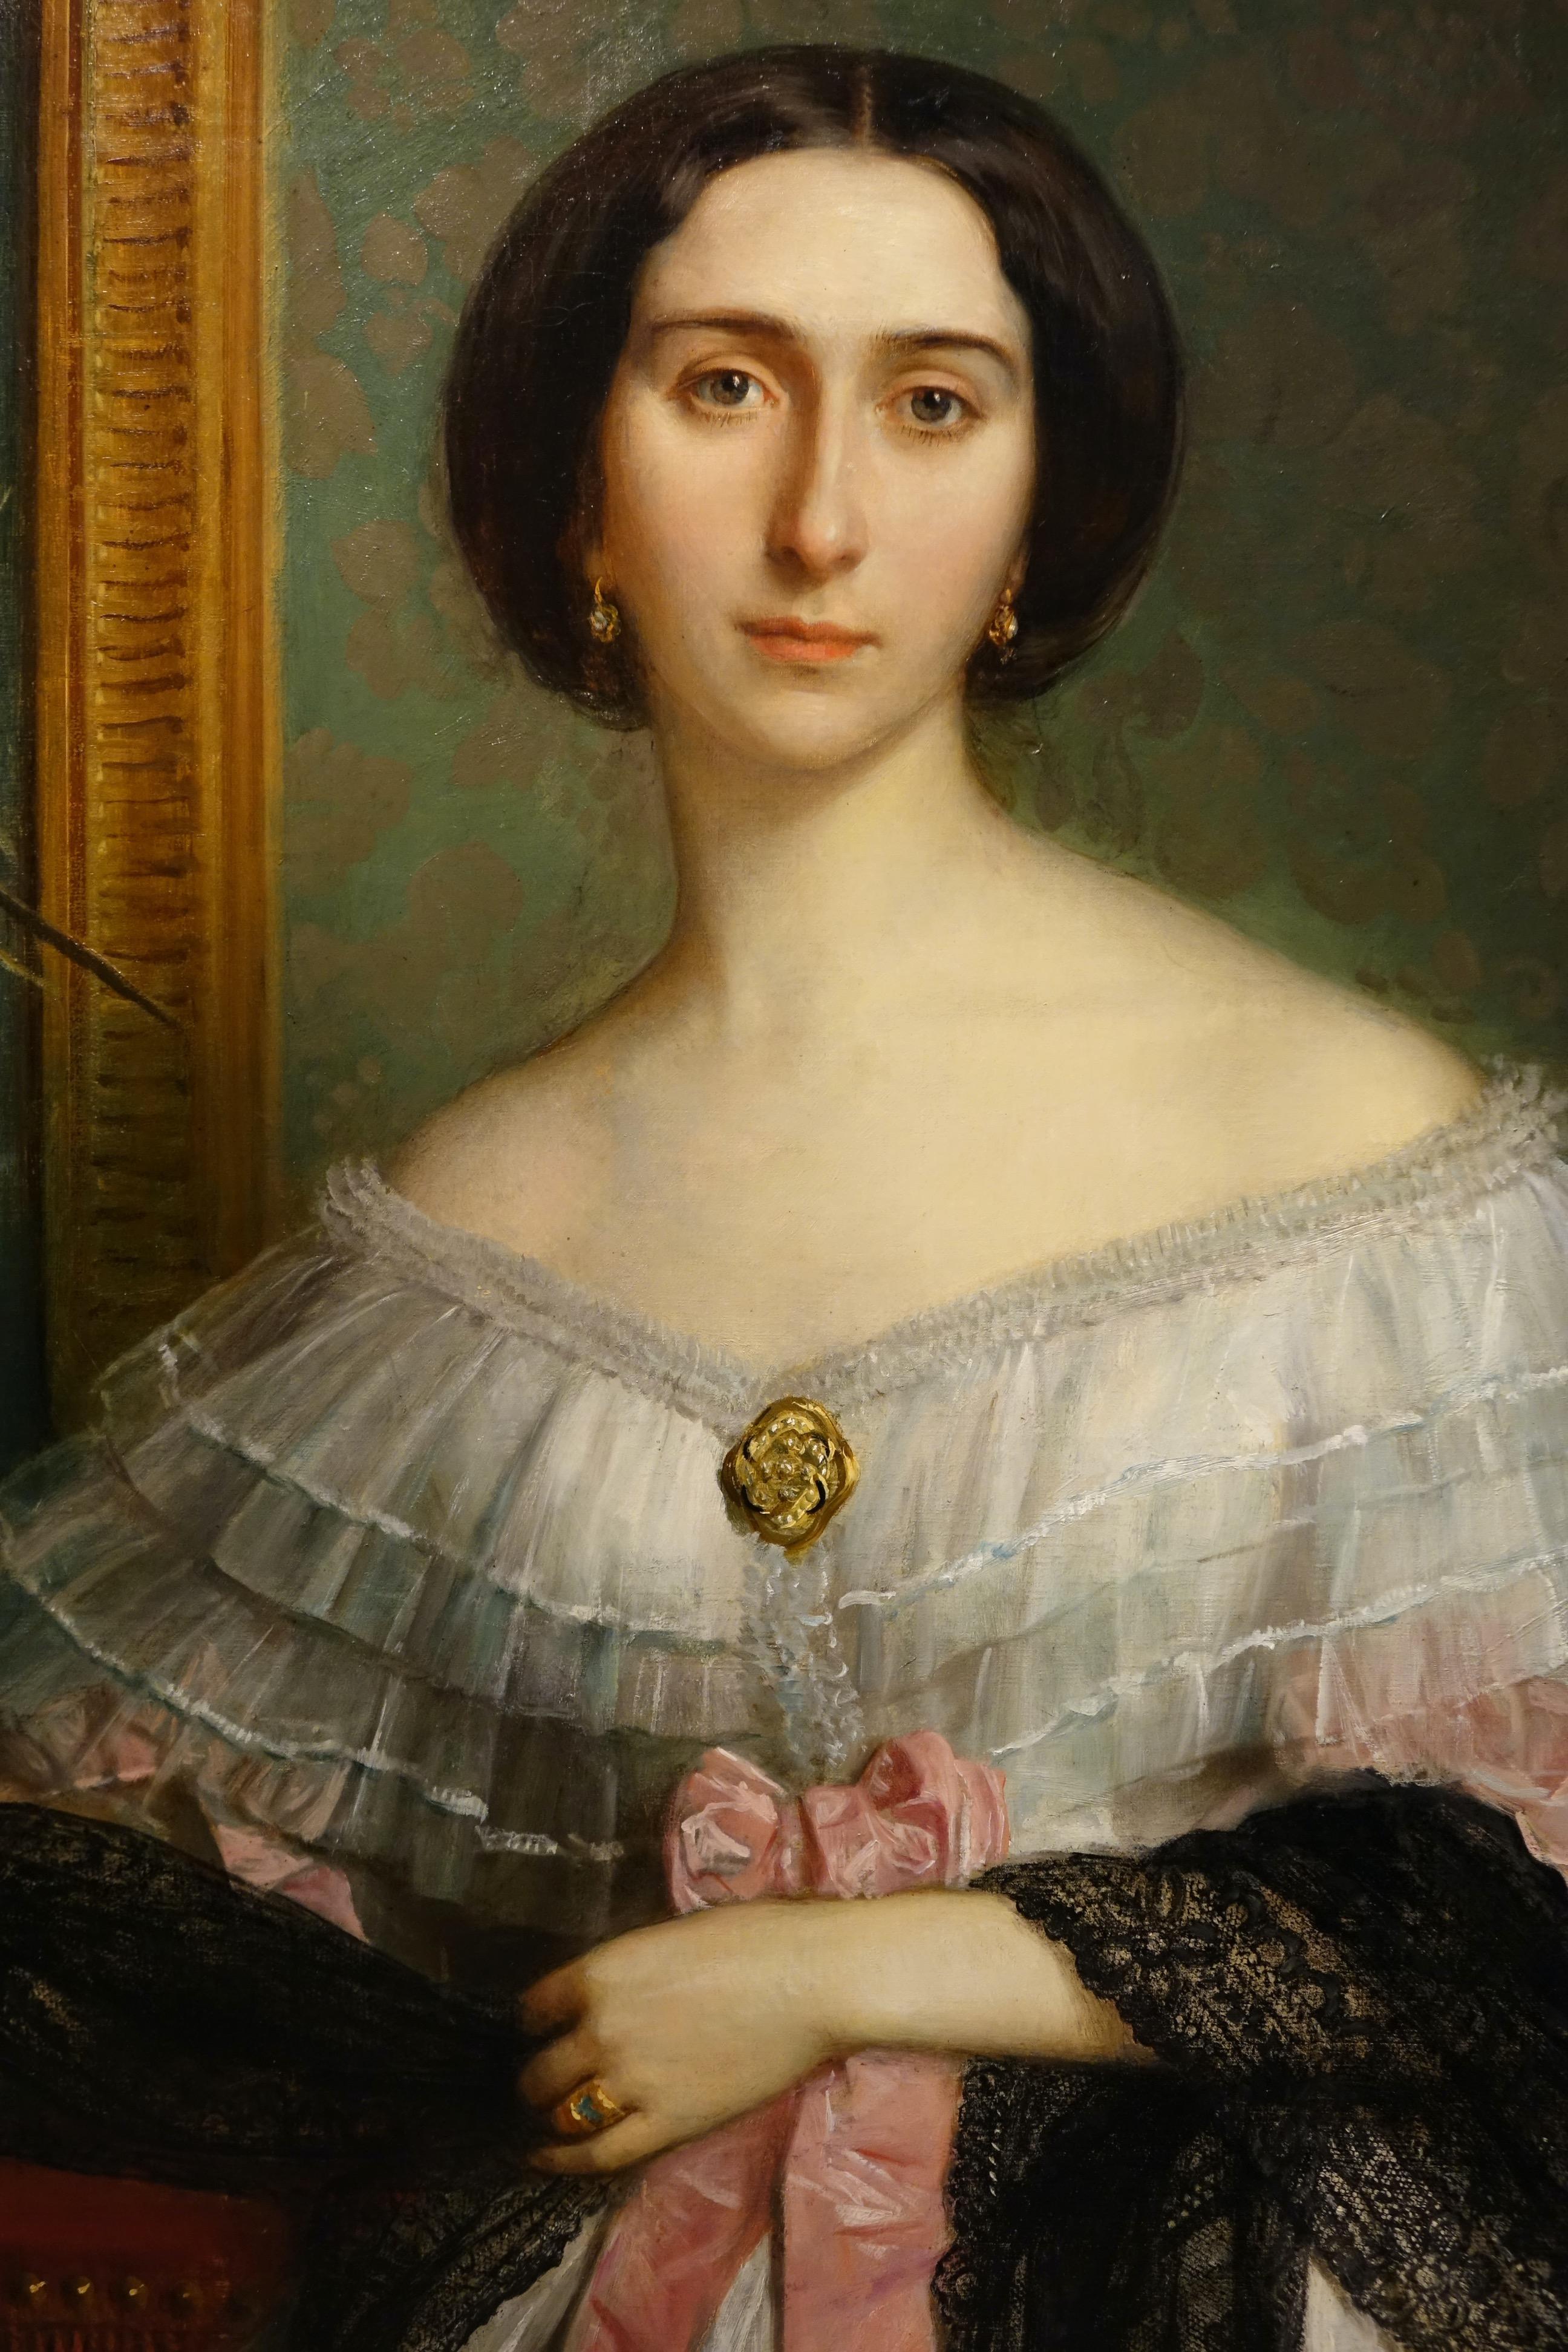 Large oil on canvas portraying a young woman of fine character, undoubtedly an aristocrat, French school circa 1850.
According to family tradition, this is the portrait of Countess Hallez Claparede, lady-in-waiting to the Empress Eugénie